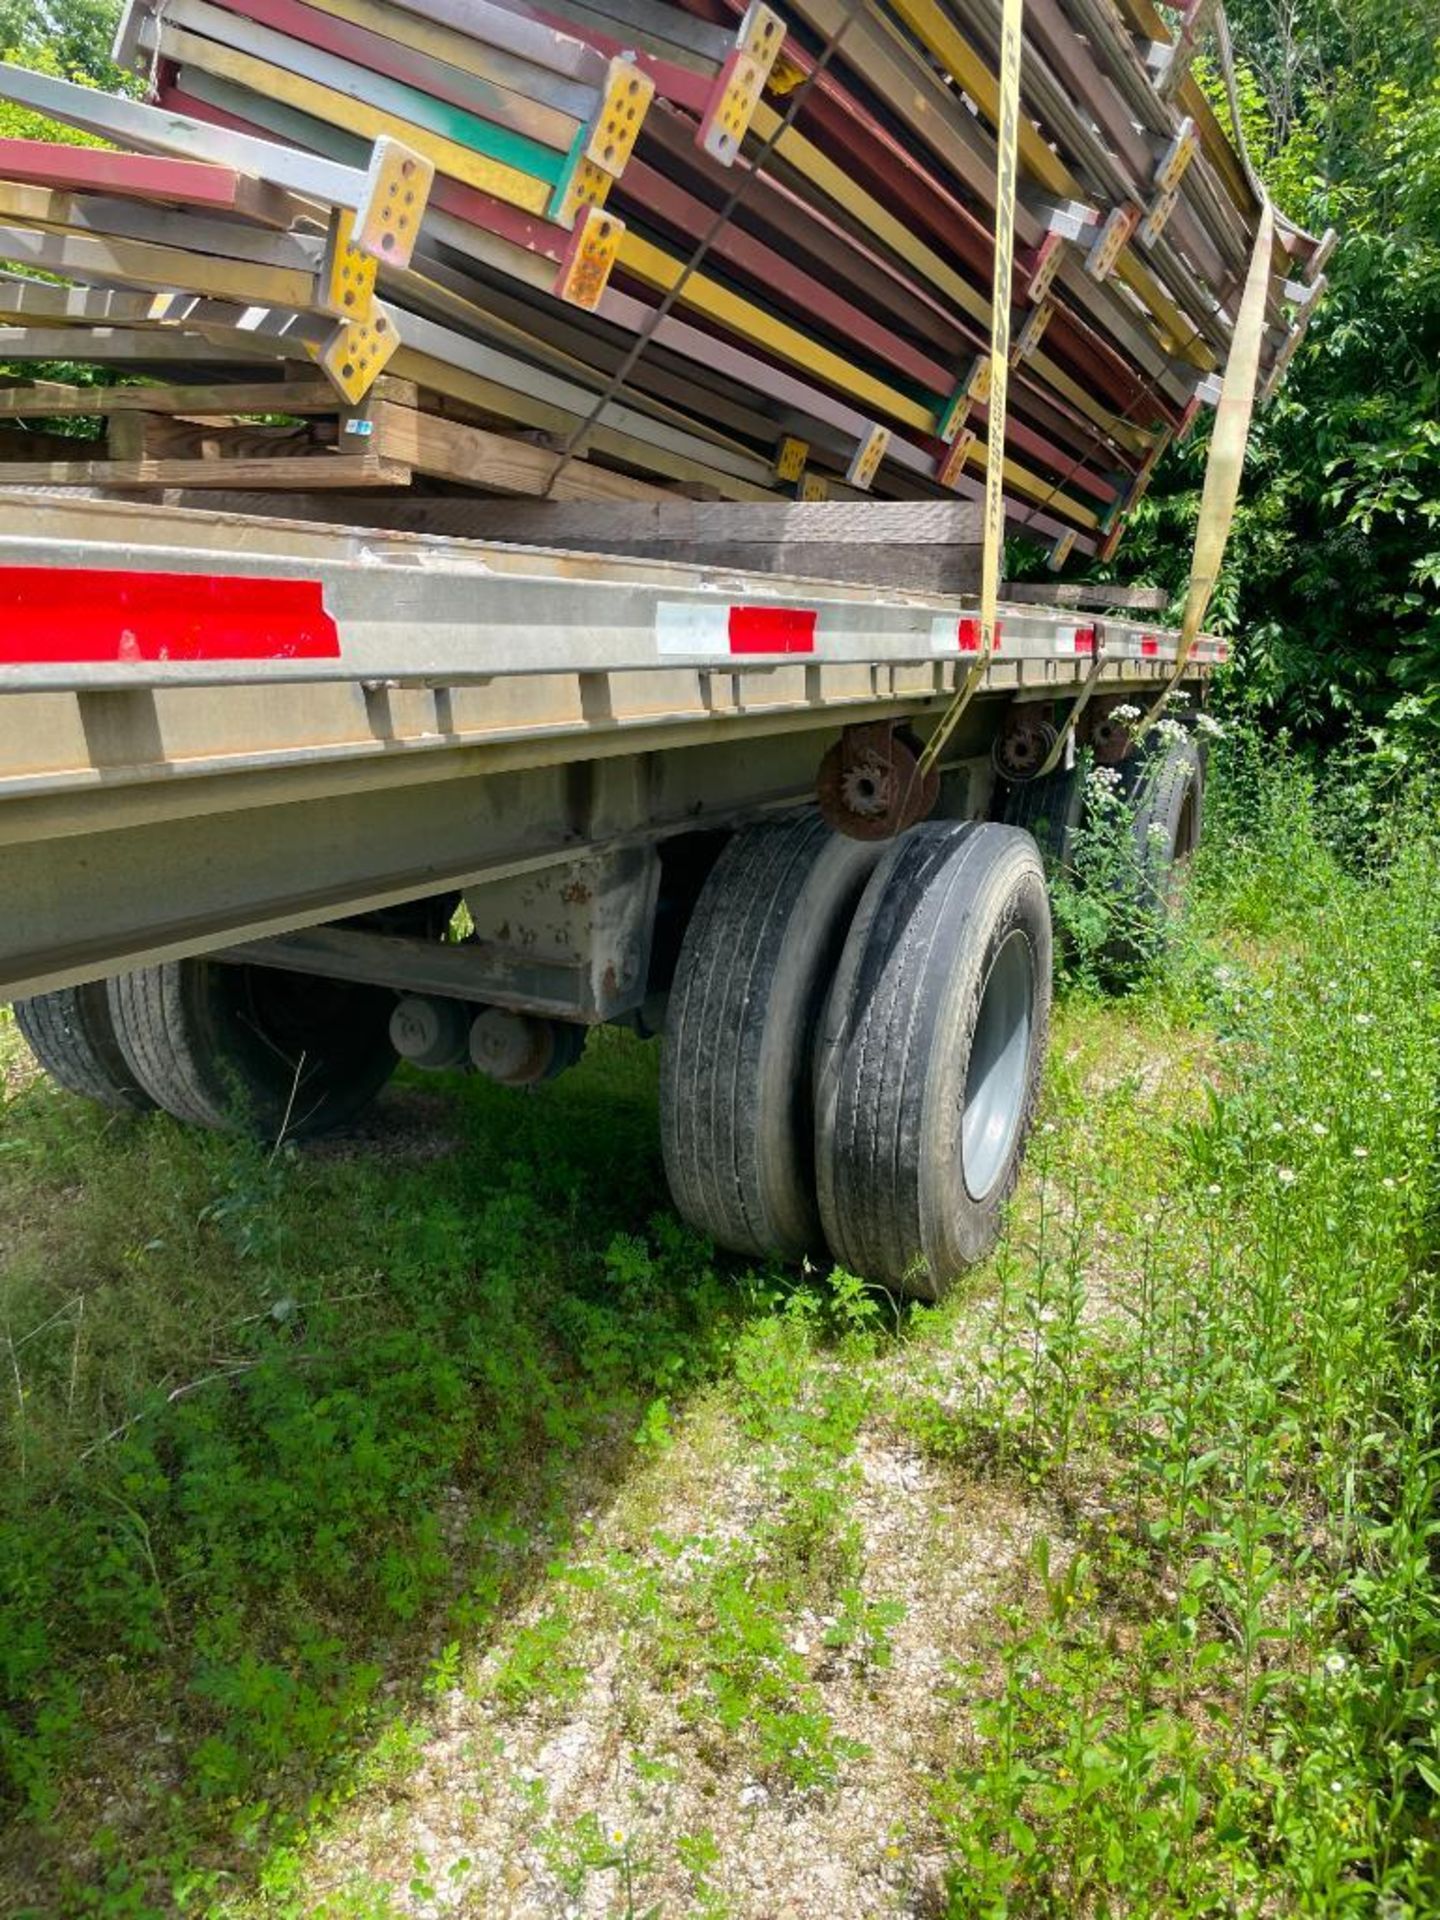 1983 RAVENS 42' ALUMINUM FLATBED TRAILER, DUAL TANDEM SPREAD AXLE, MODEL 54241, WITH HEADACHE - Image 4 of 4